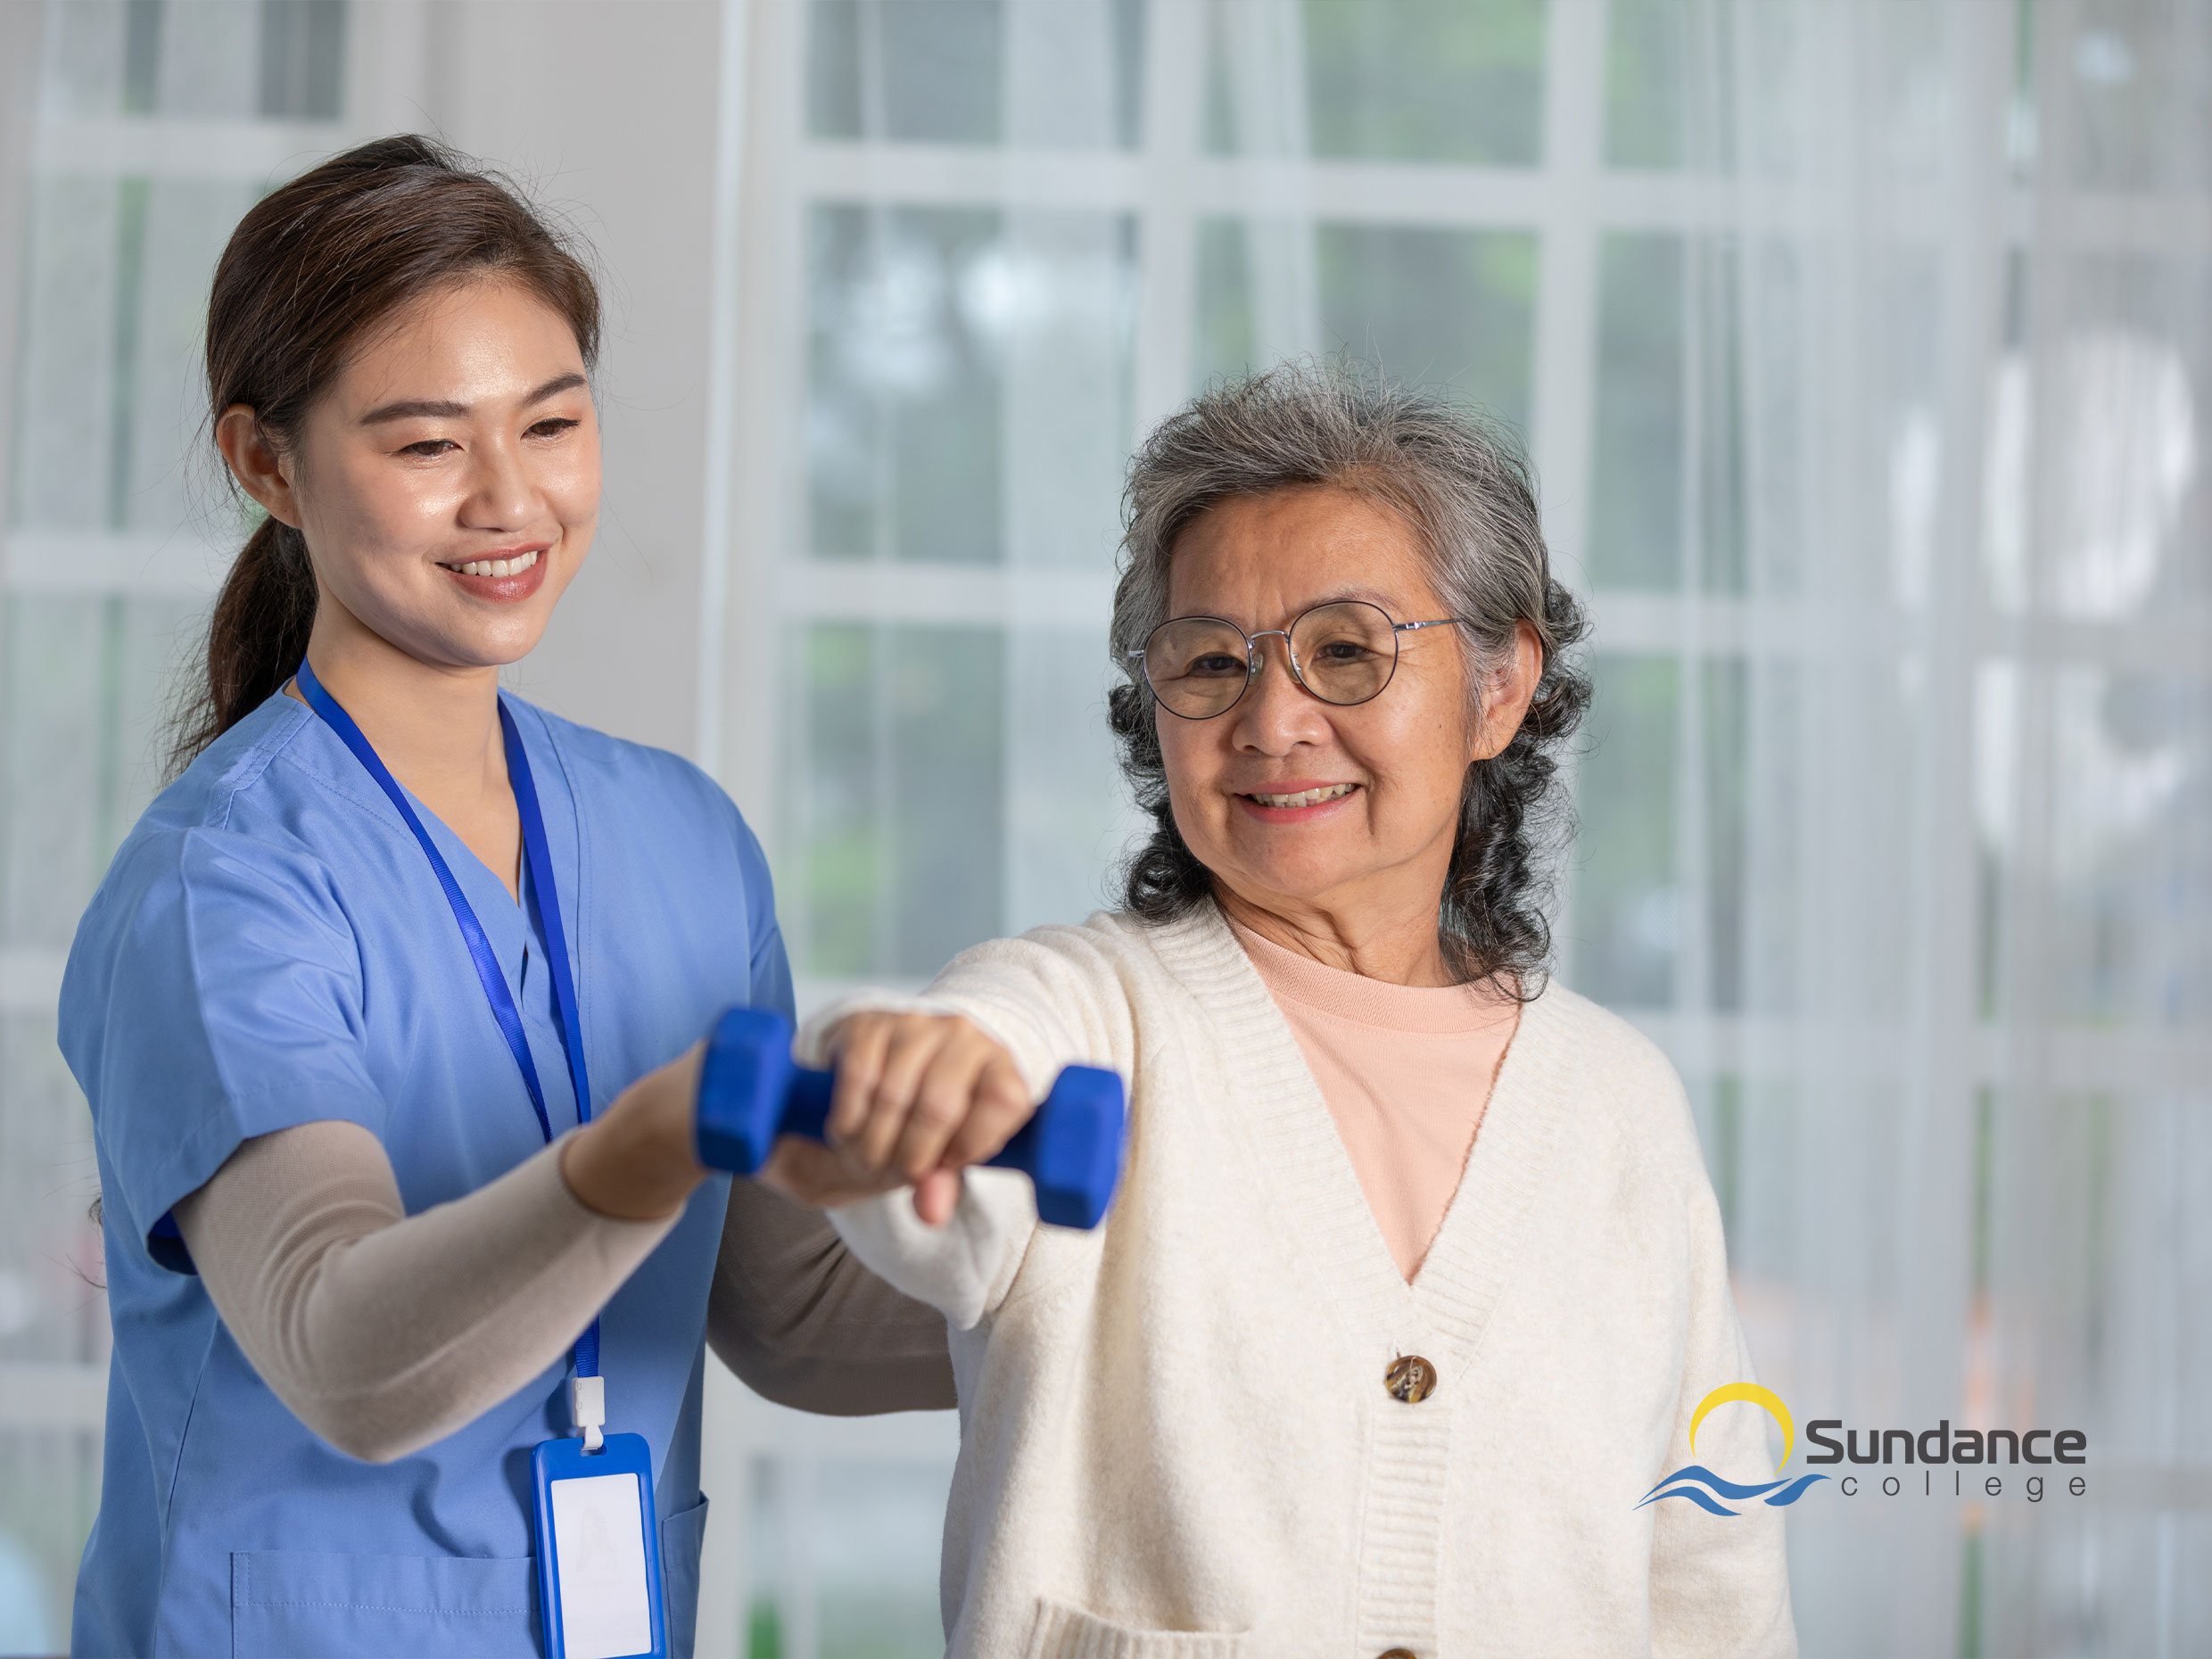 young female personal support care worker helping an old lady lift weights as she does physical mobility exercises